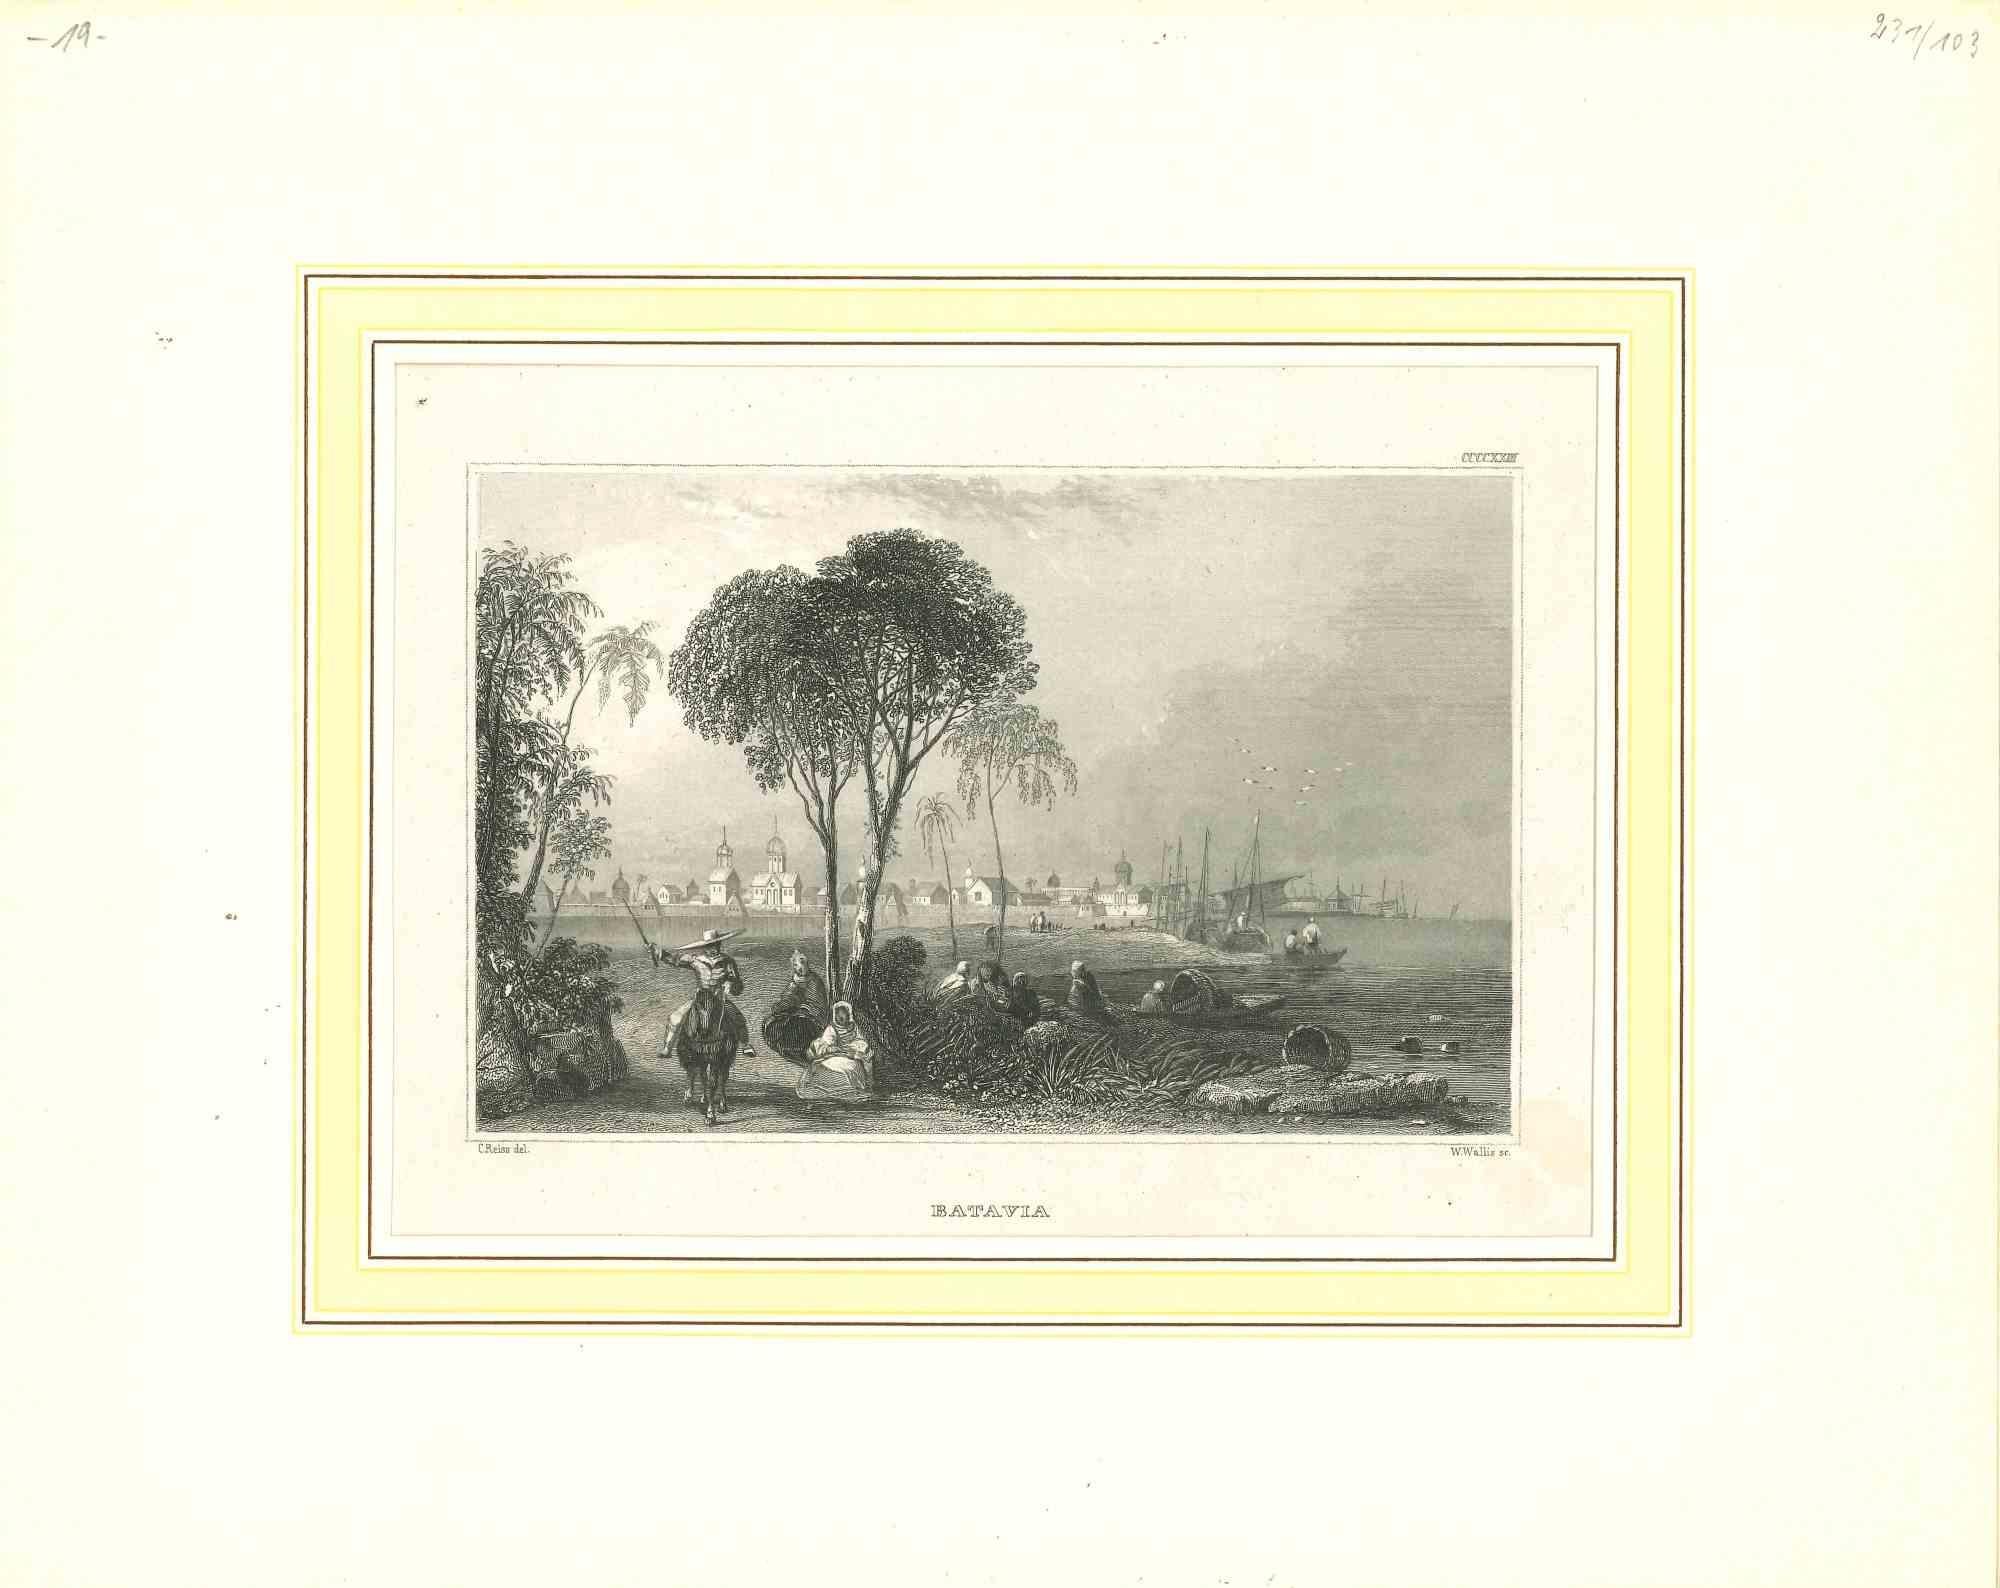 Unknown Landscape Print - Ancient View of Batavia - Original Lithograph - Half of the 19th Century